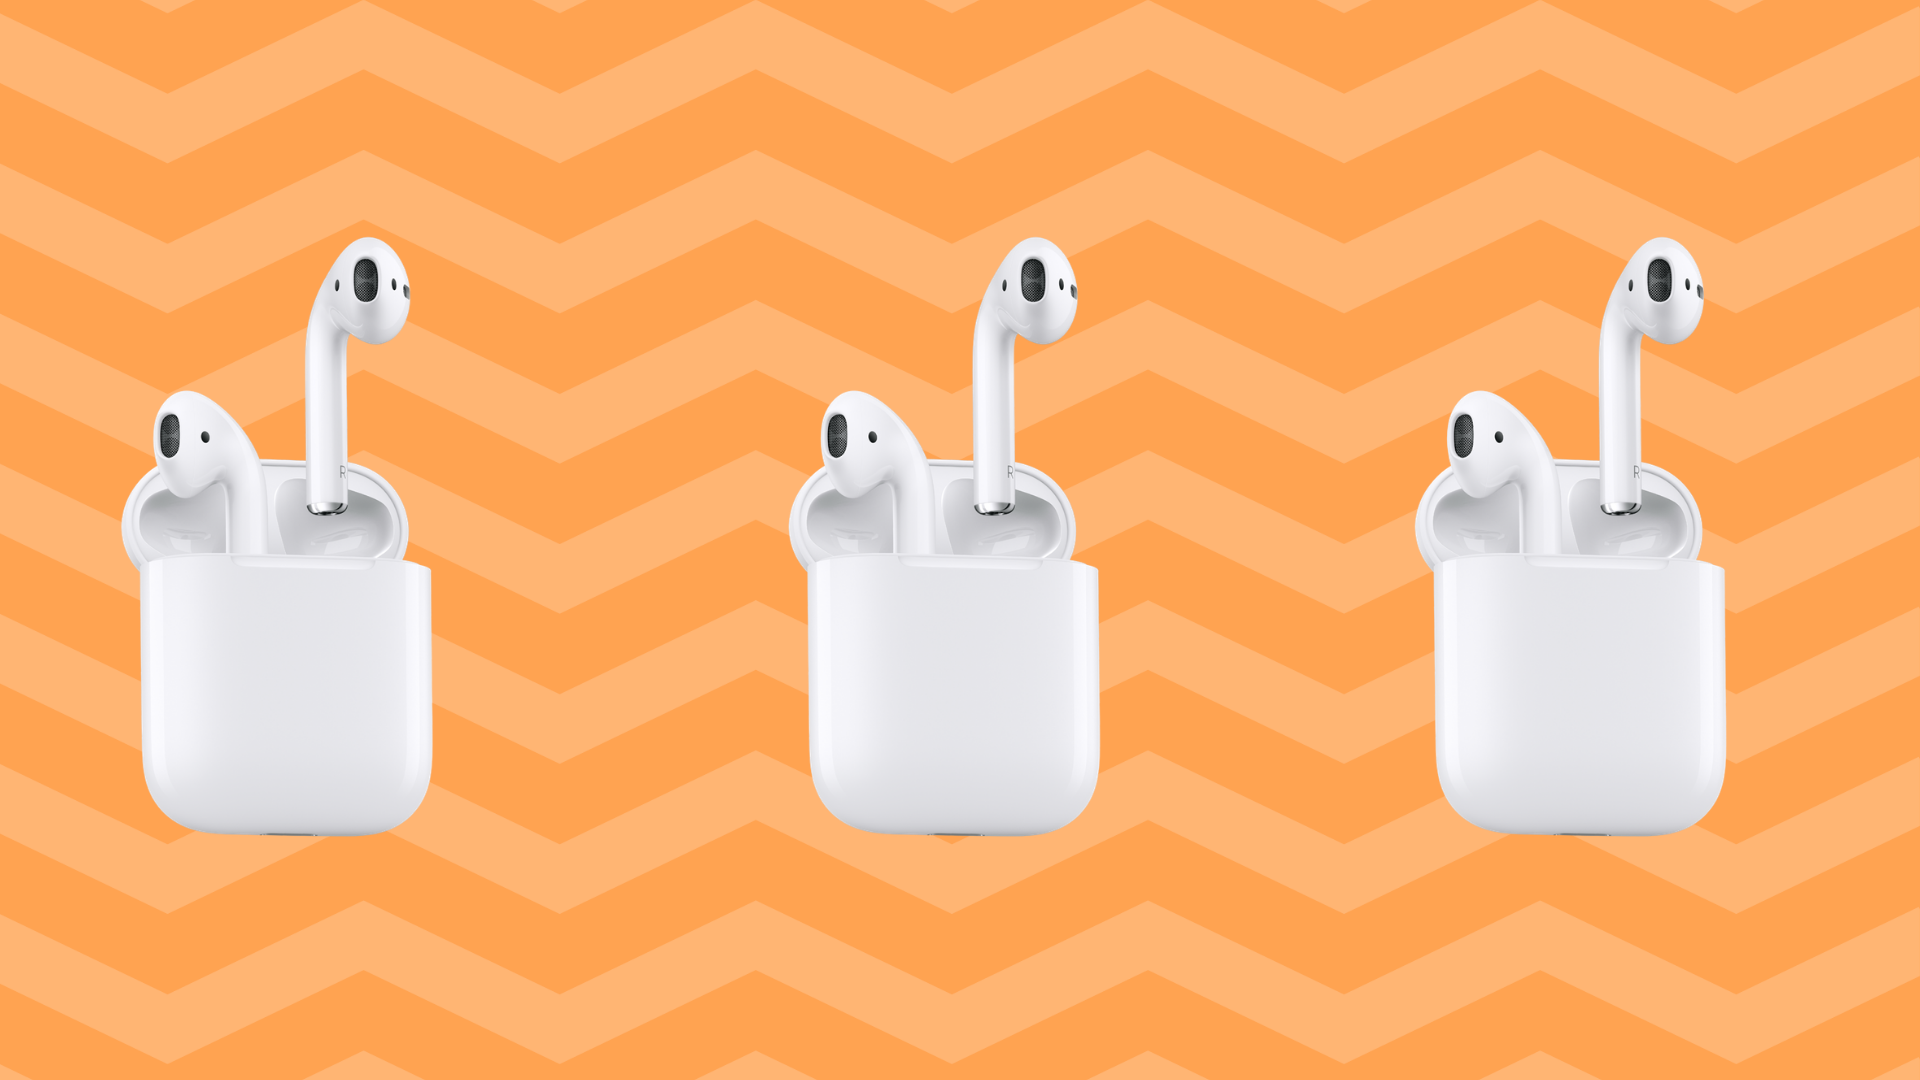 Apple AirPods are on sale at Amazon